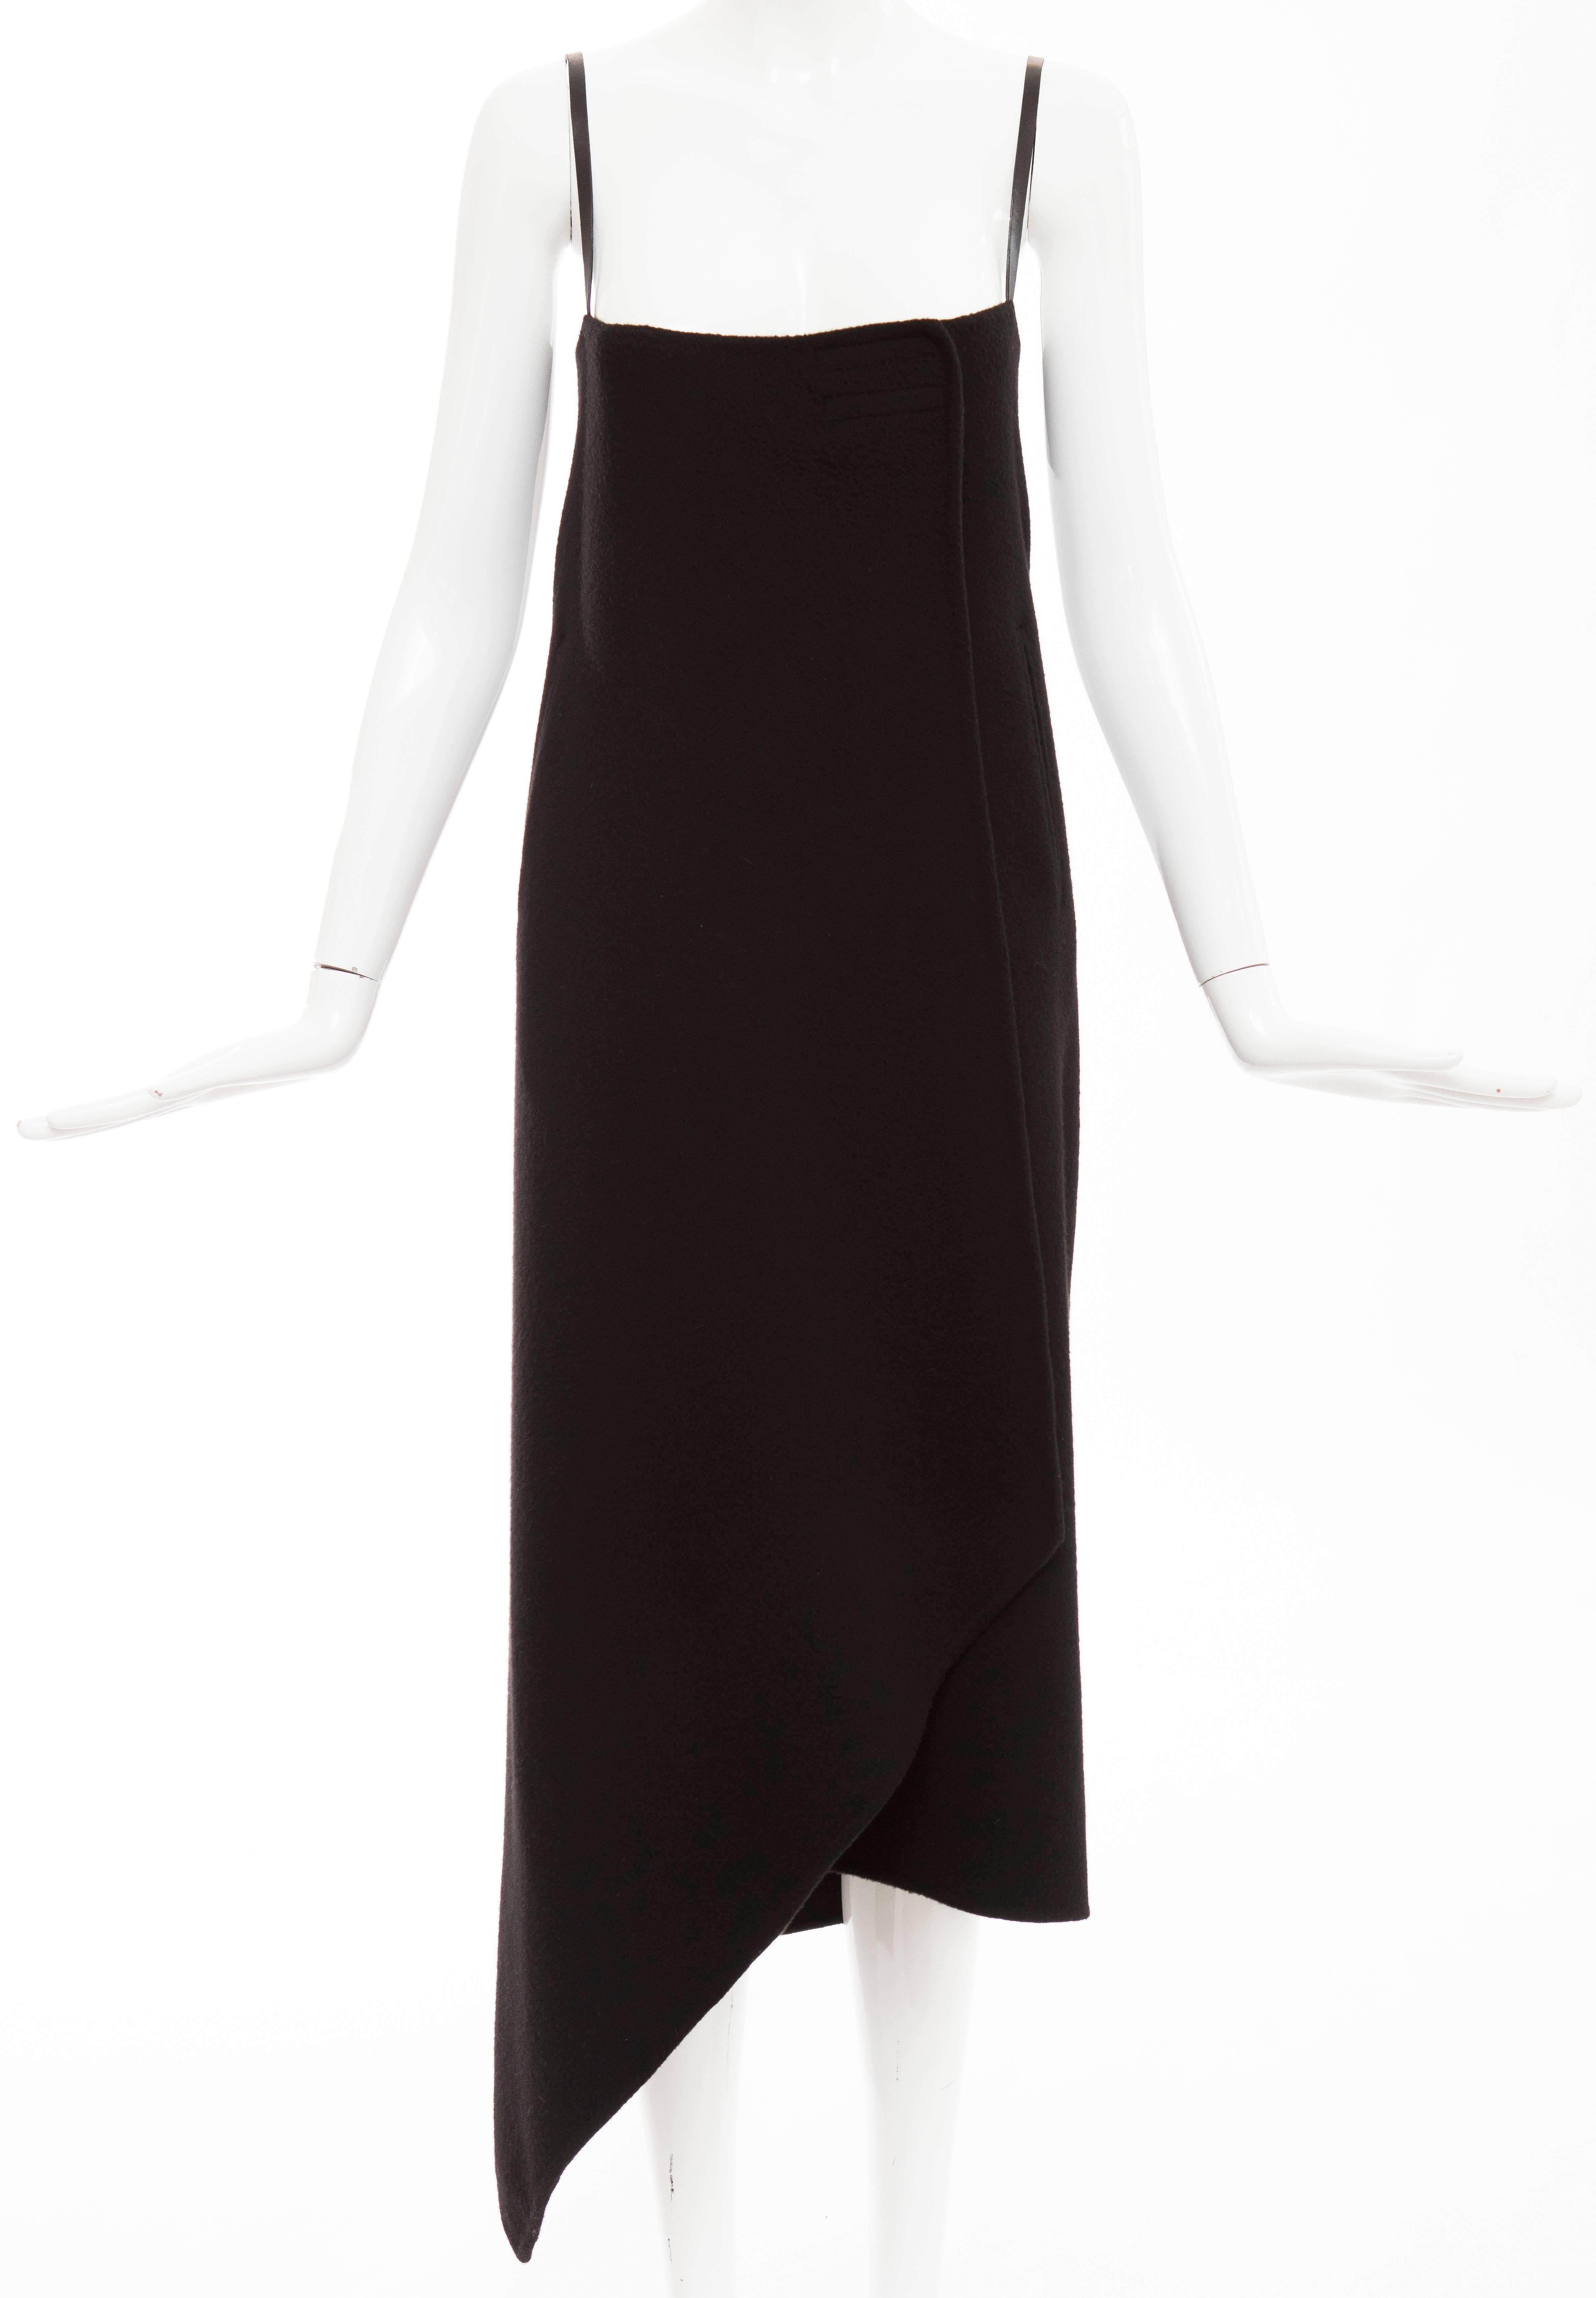 John Bartlett, Autumn-Winter 1999, black double-faced cashmere dress with black leather shoulder straps, velcro closure, two front pockets and asymmetrical hem.

UU. 42